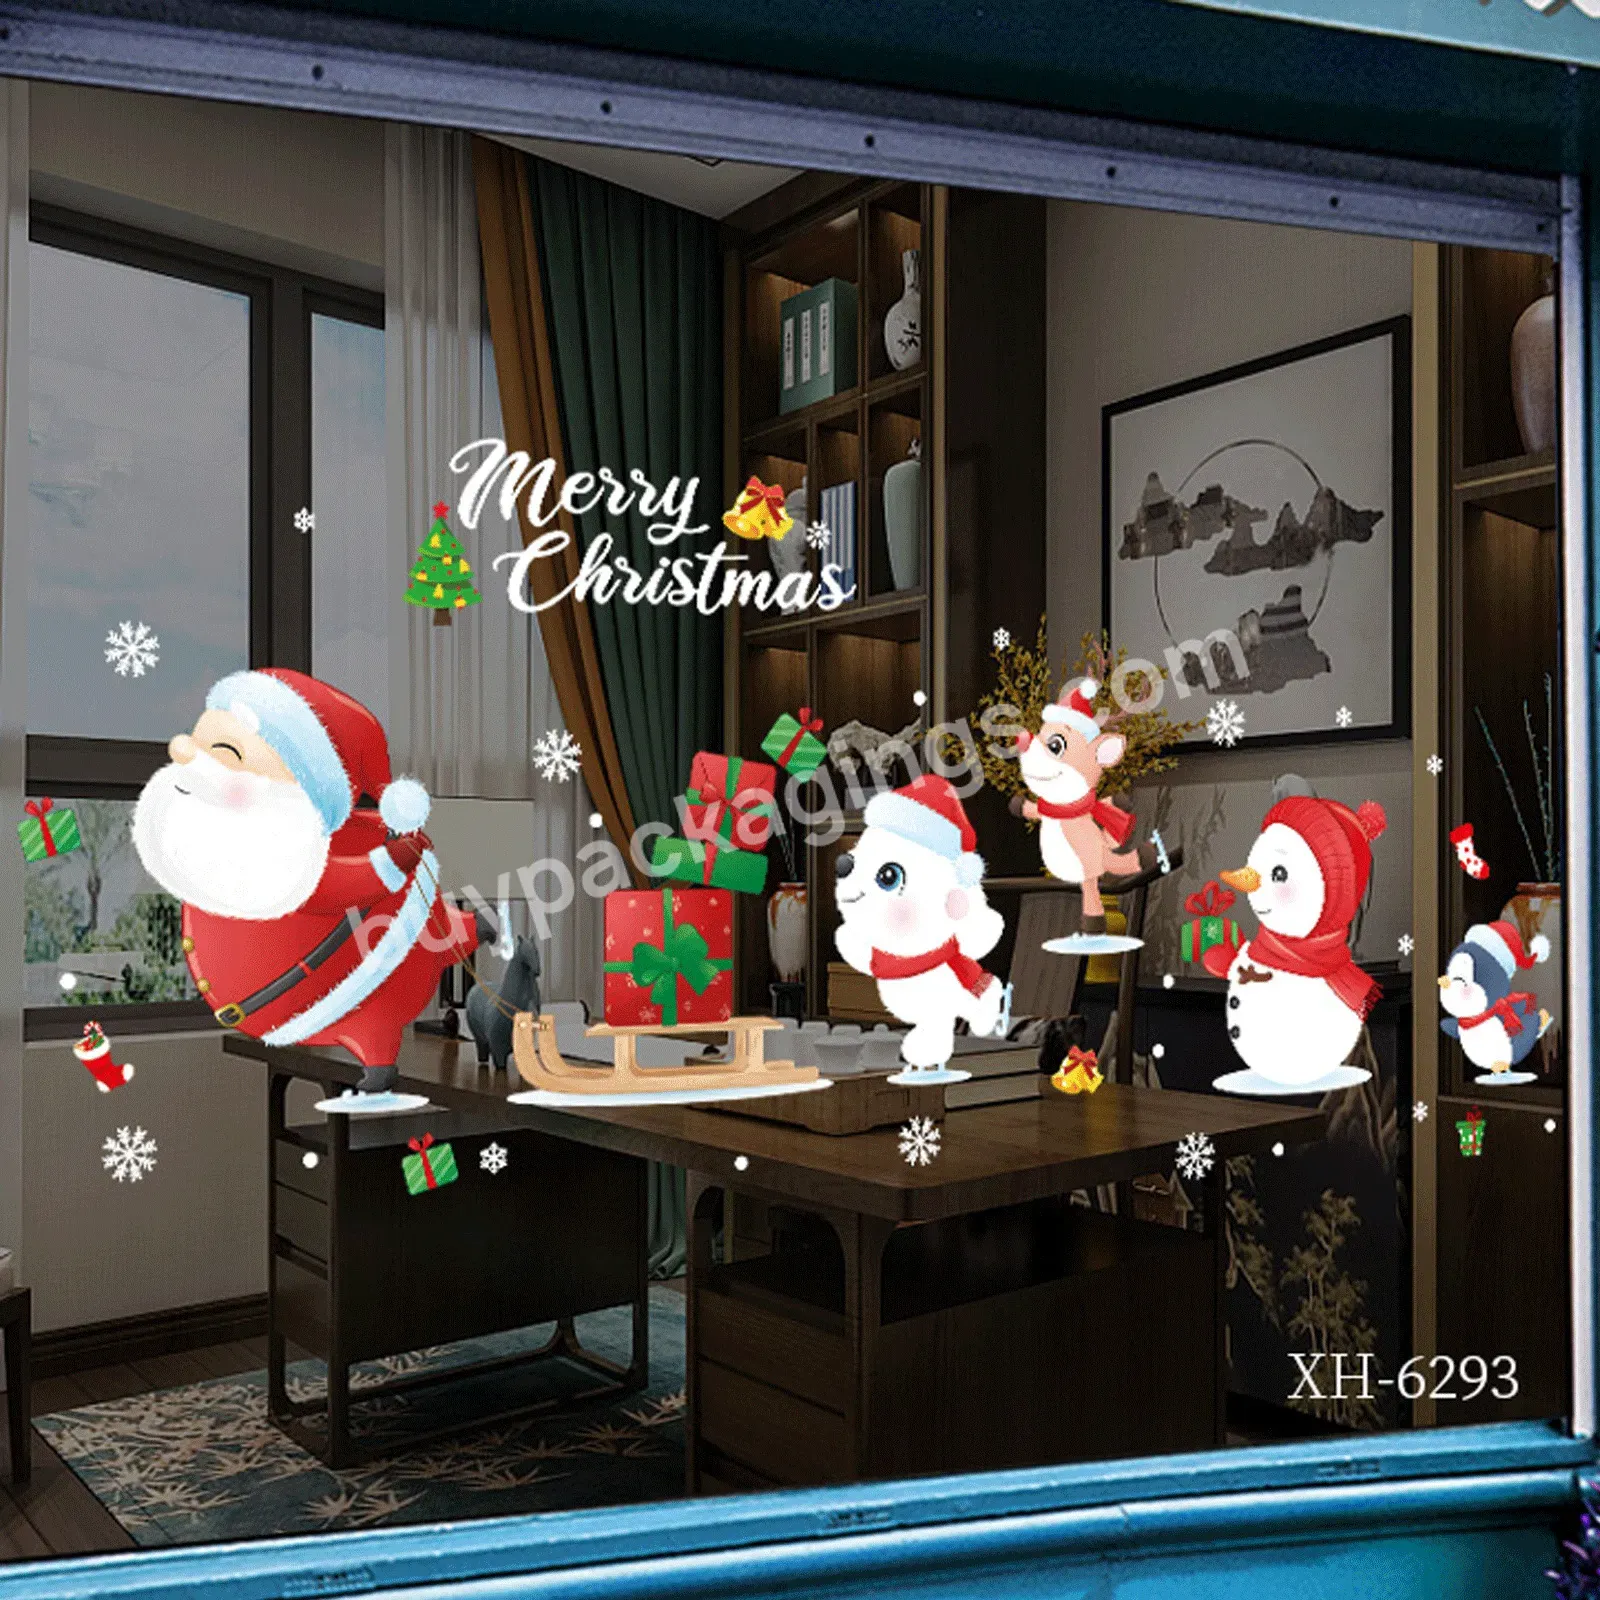 Hot Sale In Stock Merry Christmas Window Stickers - Buy Christmas Stickers,Christmas Window Stickers,Merry Christmas Stickers.